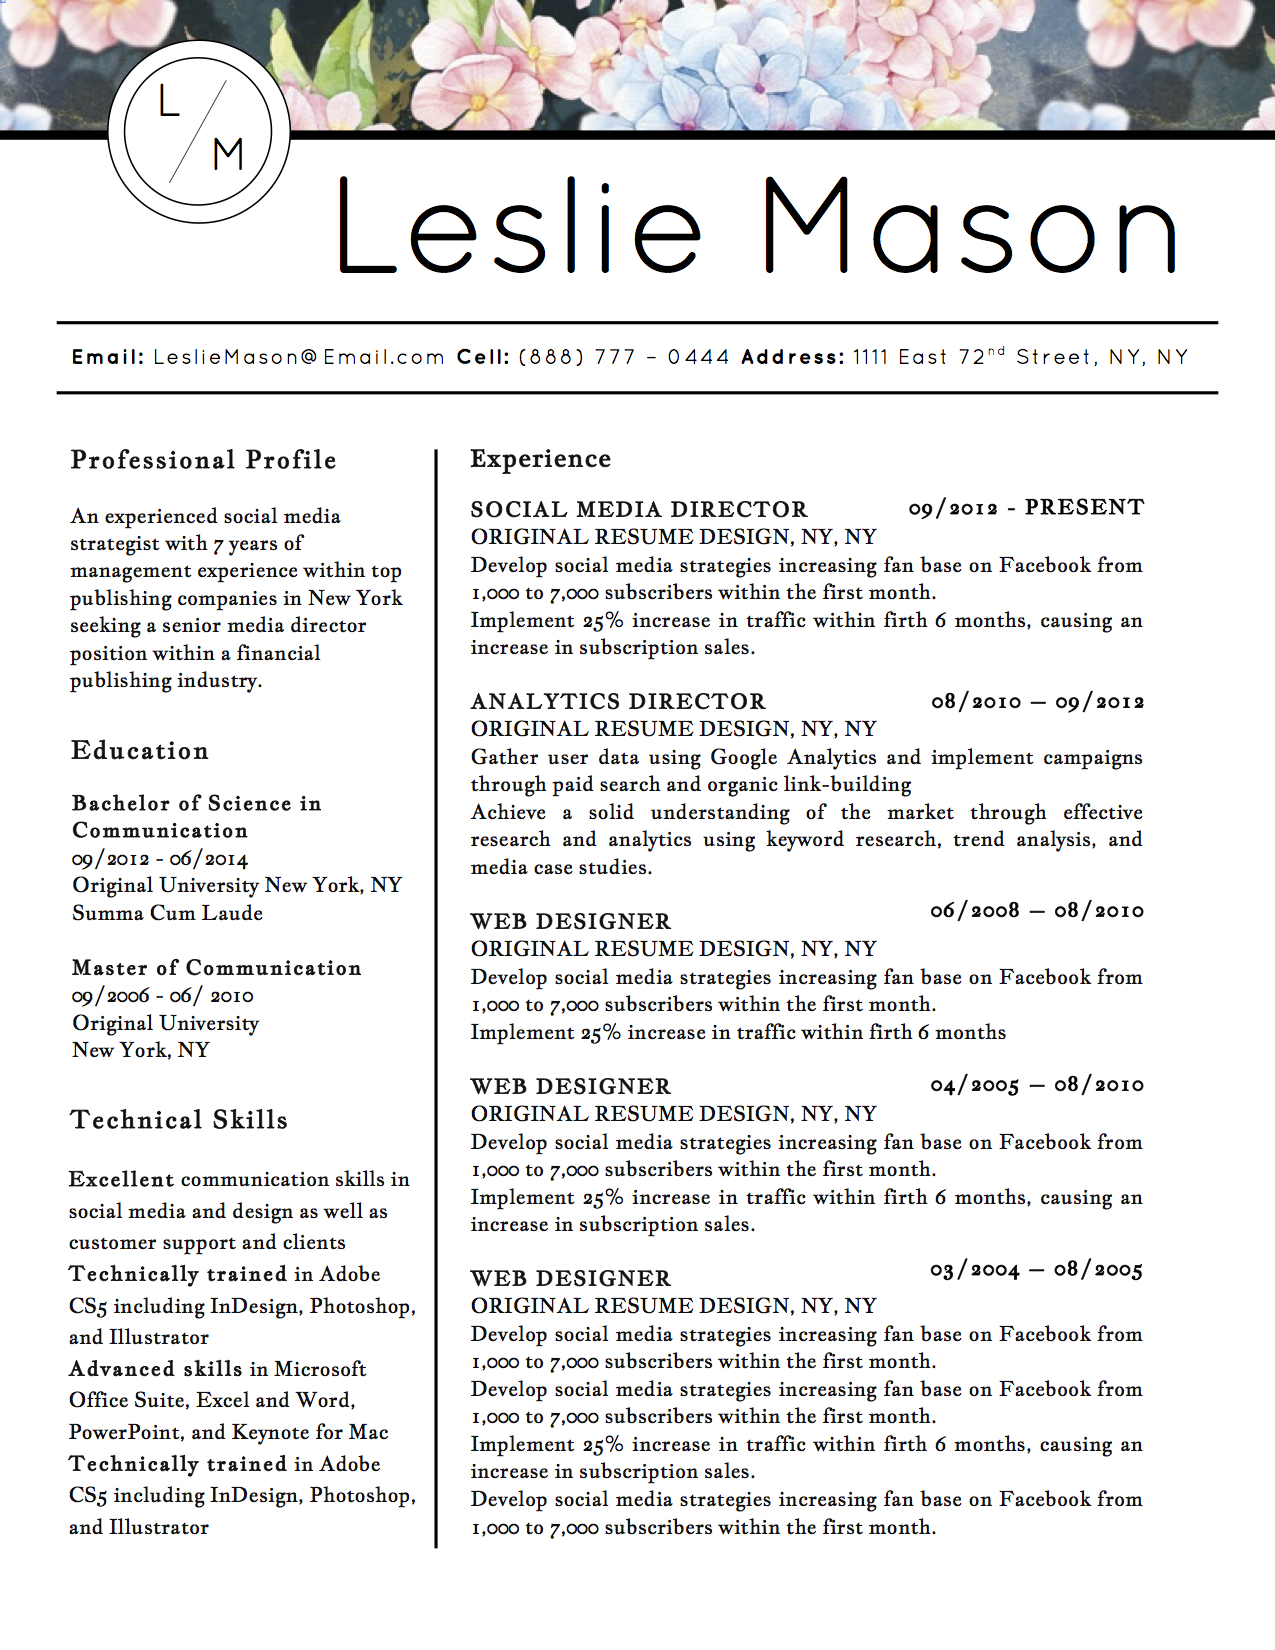 Leslie Mason Downloadable Resume + Cover Template and Cover Letter Template for Microsoft Word and Apple Pages. This cover letter template is perfect for anyone in the fashion field. The template’s design is a modern, unique, colorful, and professional. WE SWEAT THE DETAILS, SO YOU DON’T HAVE TO Stand Out Shop resume templates for Microsoft Word and Apple Pages will help you design a modern and professional resume in minutes! Simply download, open in Microsoft Word or Apple Pages, and input your resume’s information. Increase your chances of landing your dream job with a job winning, modern, simple, and scannable resume template for Microsoft Word and Apple Pages. Creating a resume shouldn’t suck Simply download a resume template from Stand Out Shop, enter your information in Microsoft Word or Apple Pages and get a beautifully formatted resume in seconds. Create a unique and vivid resume in minutes. Make an impressive resume. Customize your own layout in Microsoft Word or Apple Pages and introduce yourself in an impressive way. You can download your resume at any time. Stand out from other job seekers with a beautiful professional design.